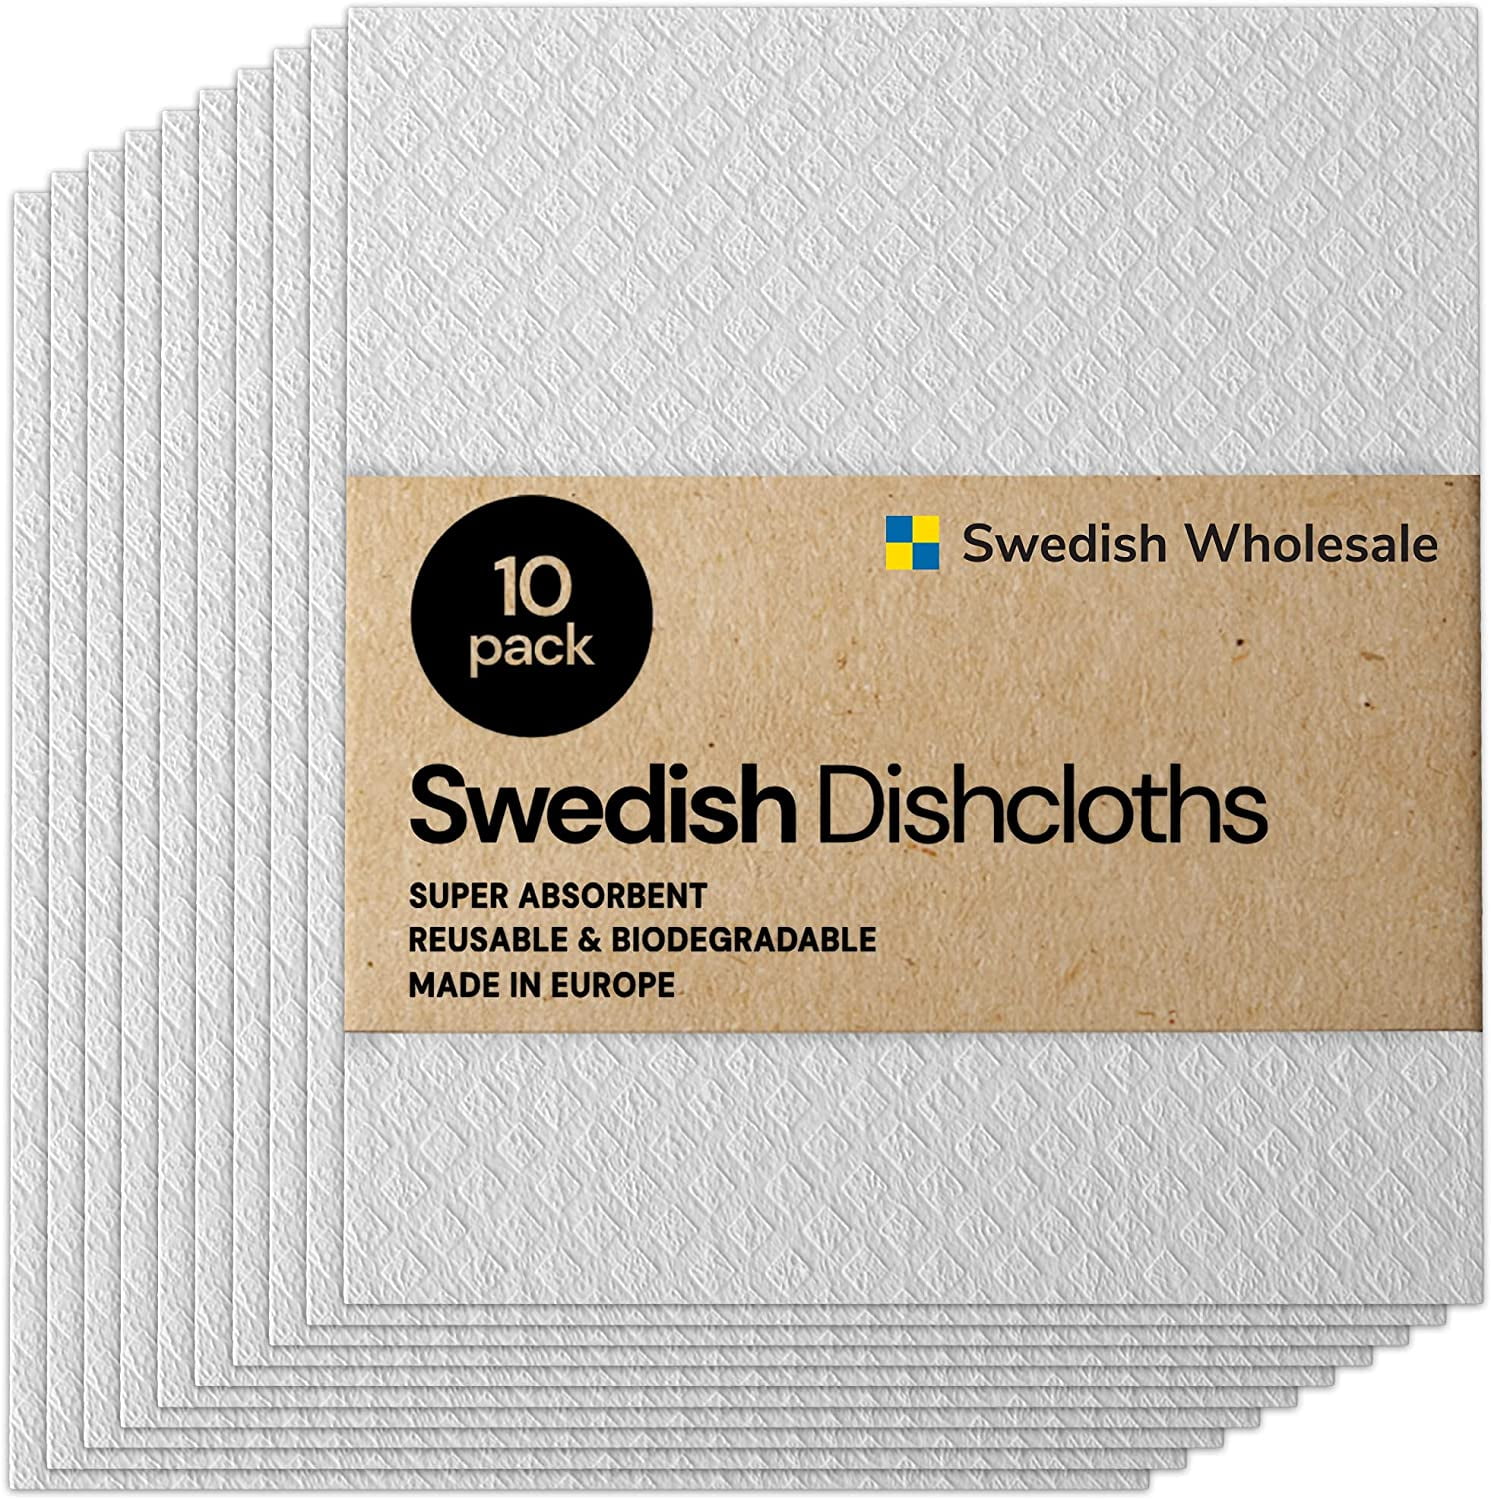 s No. 1 bestselling Swedish Dishcloths are on sale